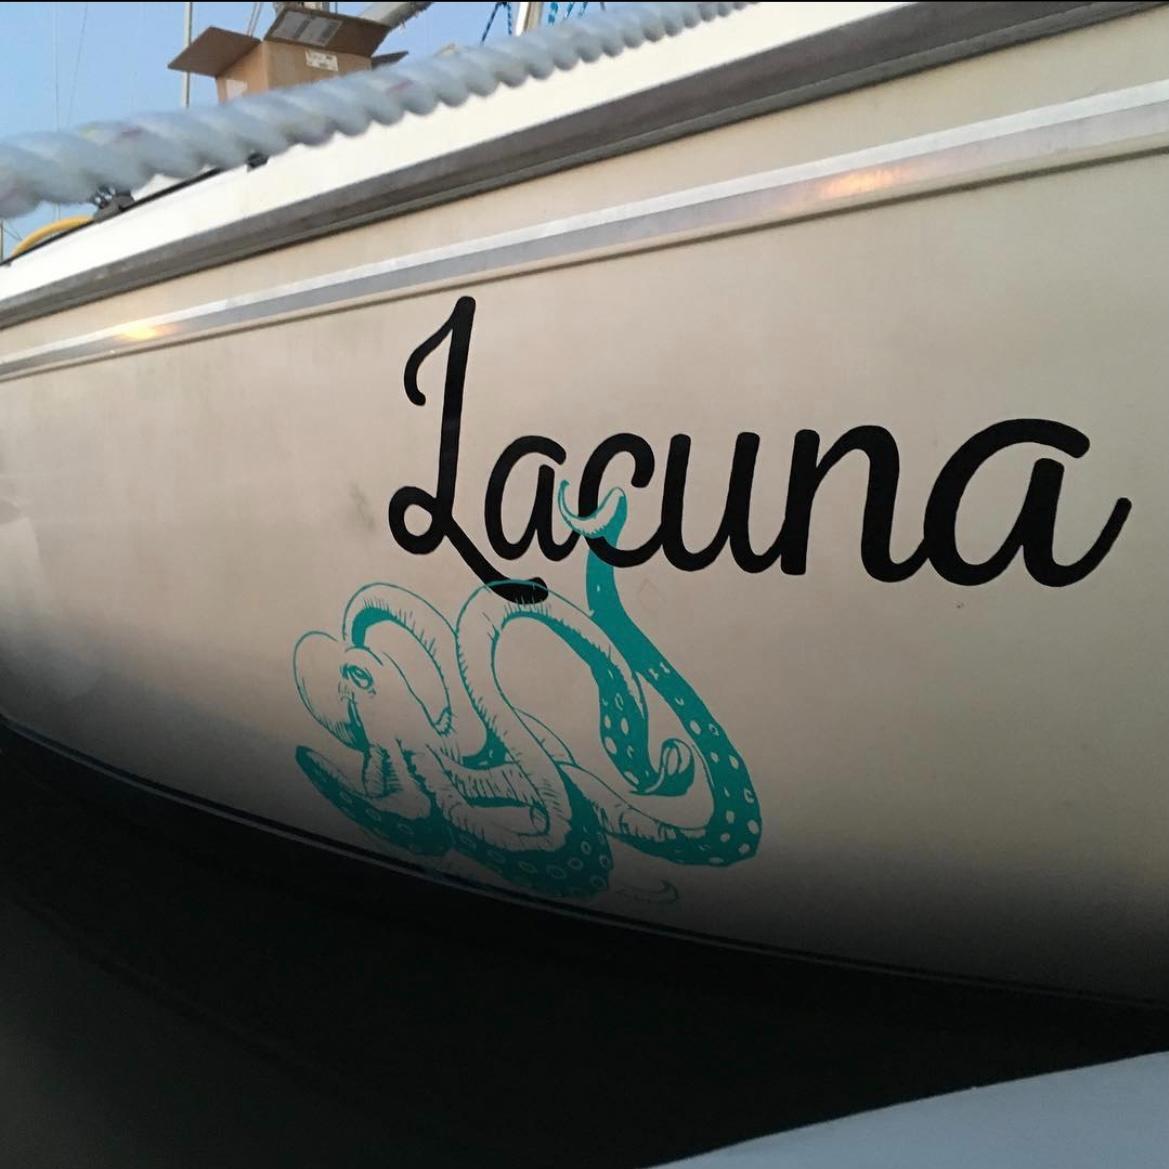 Wisconsin Wraps Boat Letters and Graphics Services